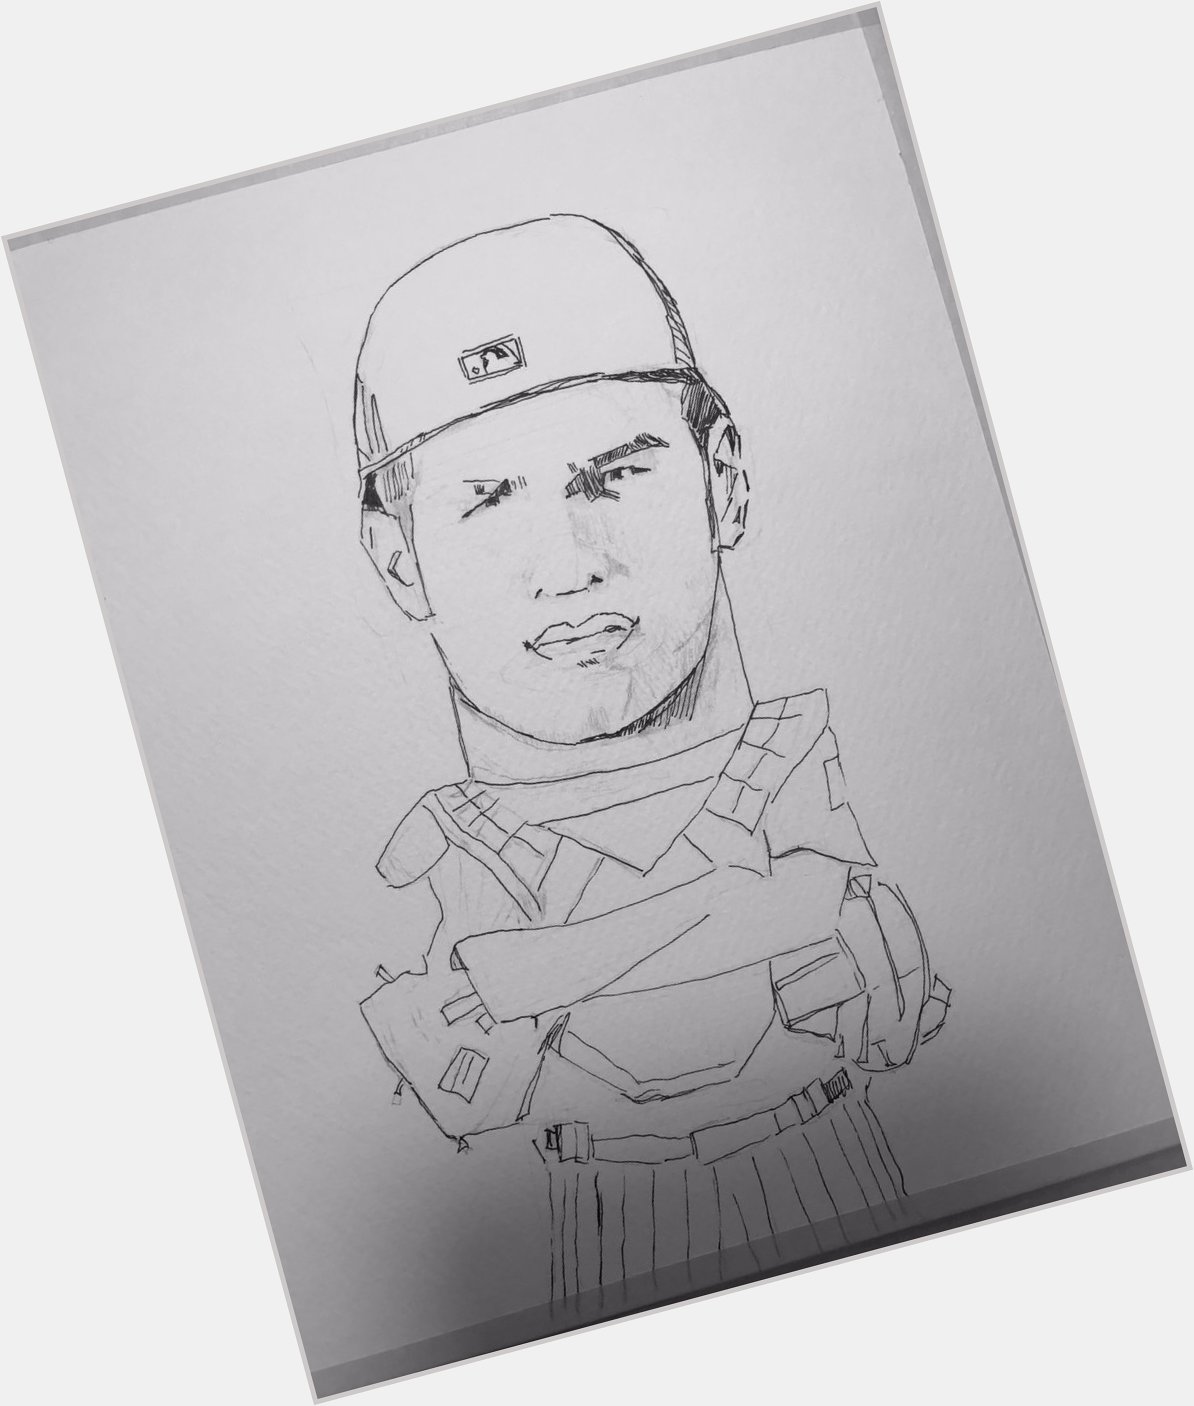 Happy Birthday to the great Minnesota Twins catcher, Joe Mauer. Bad watercolor painting on the way. 